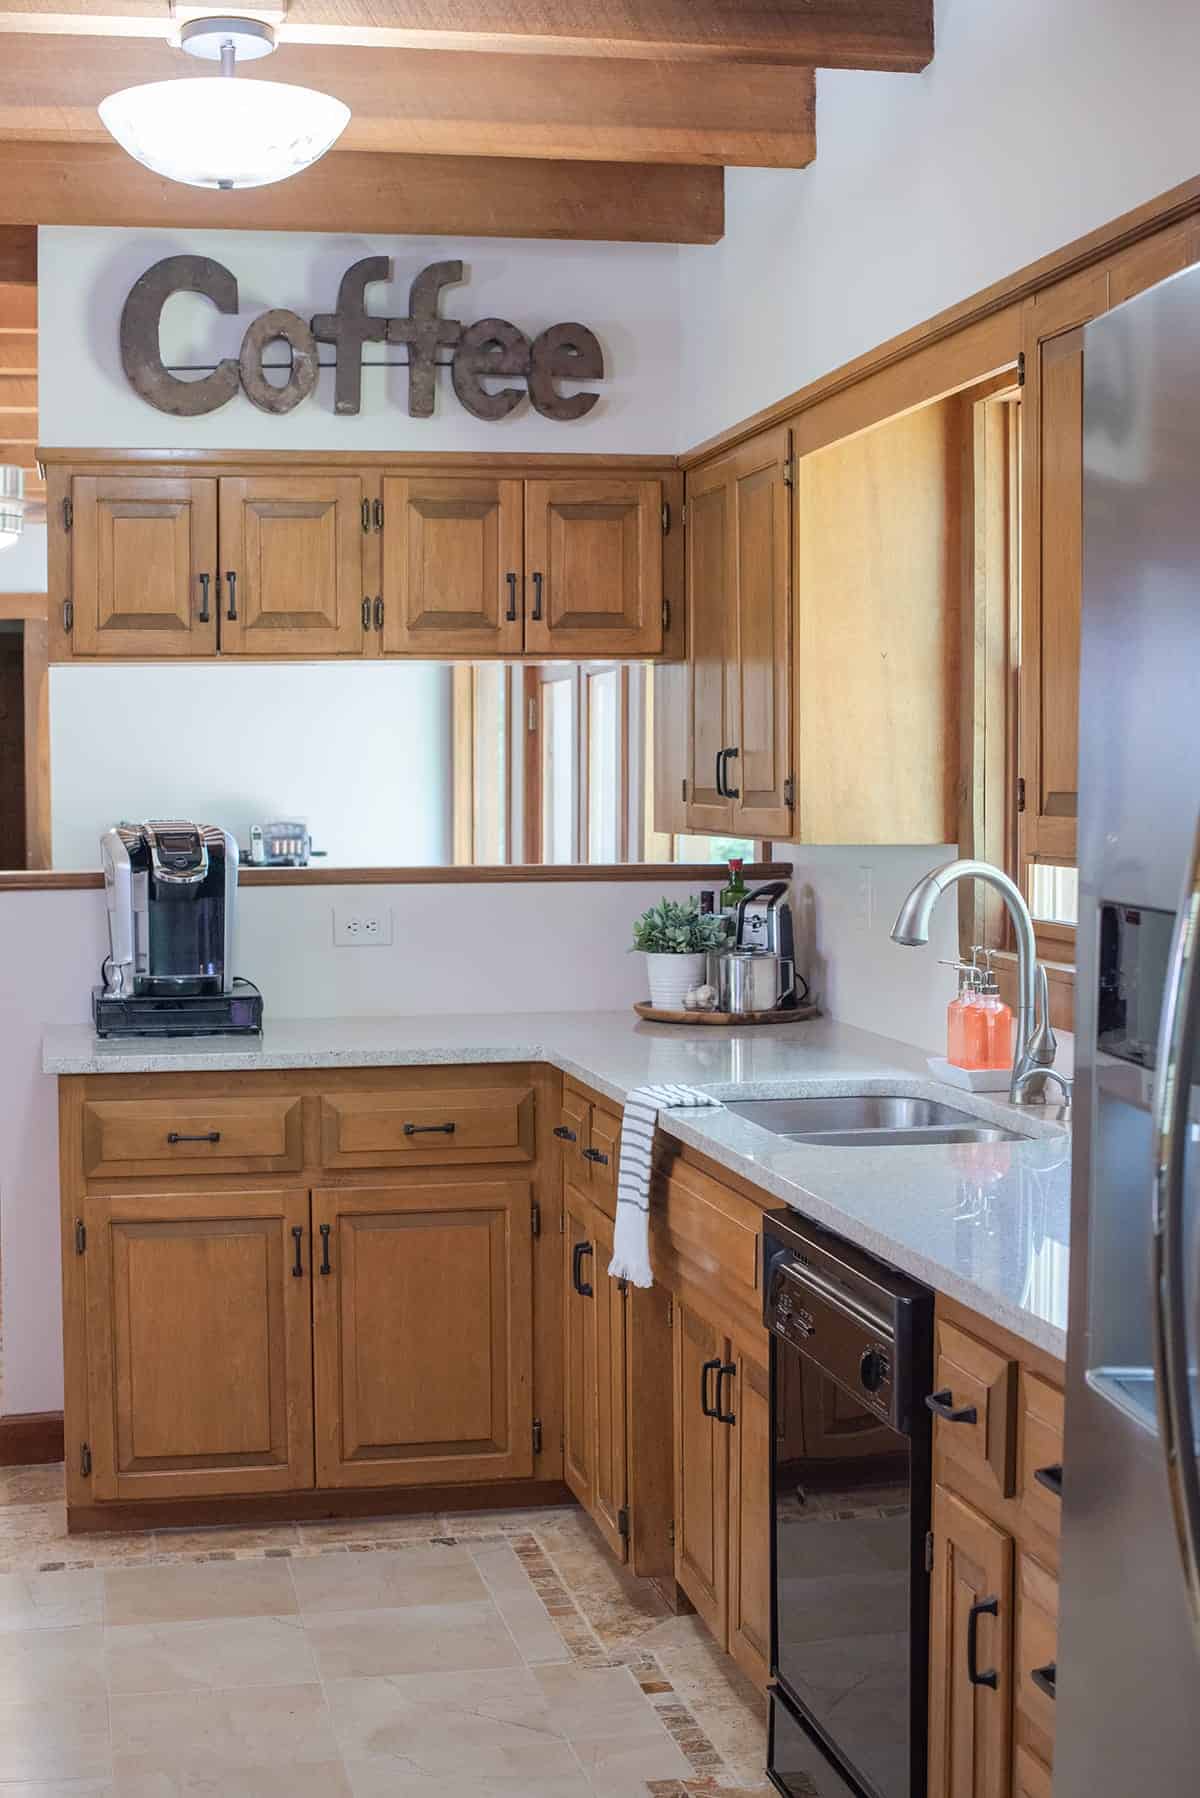 Kitchen with wood cabinets and white walls with a coffee station in view.